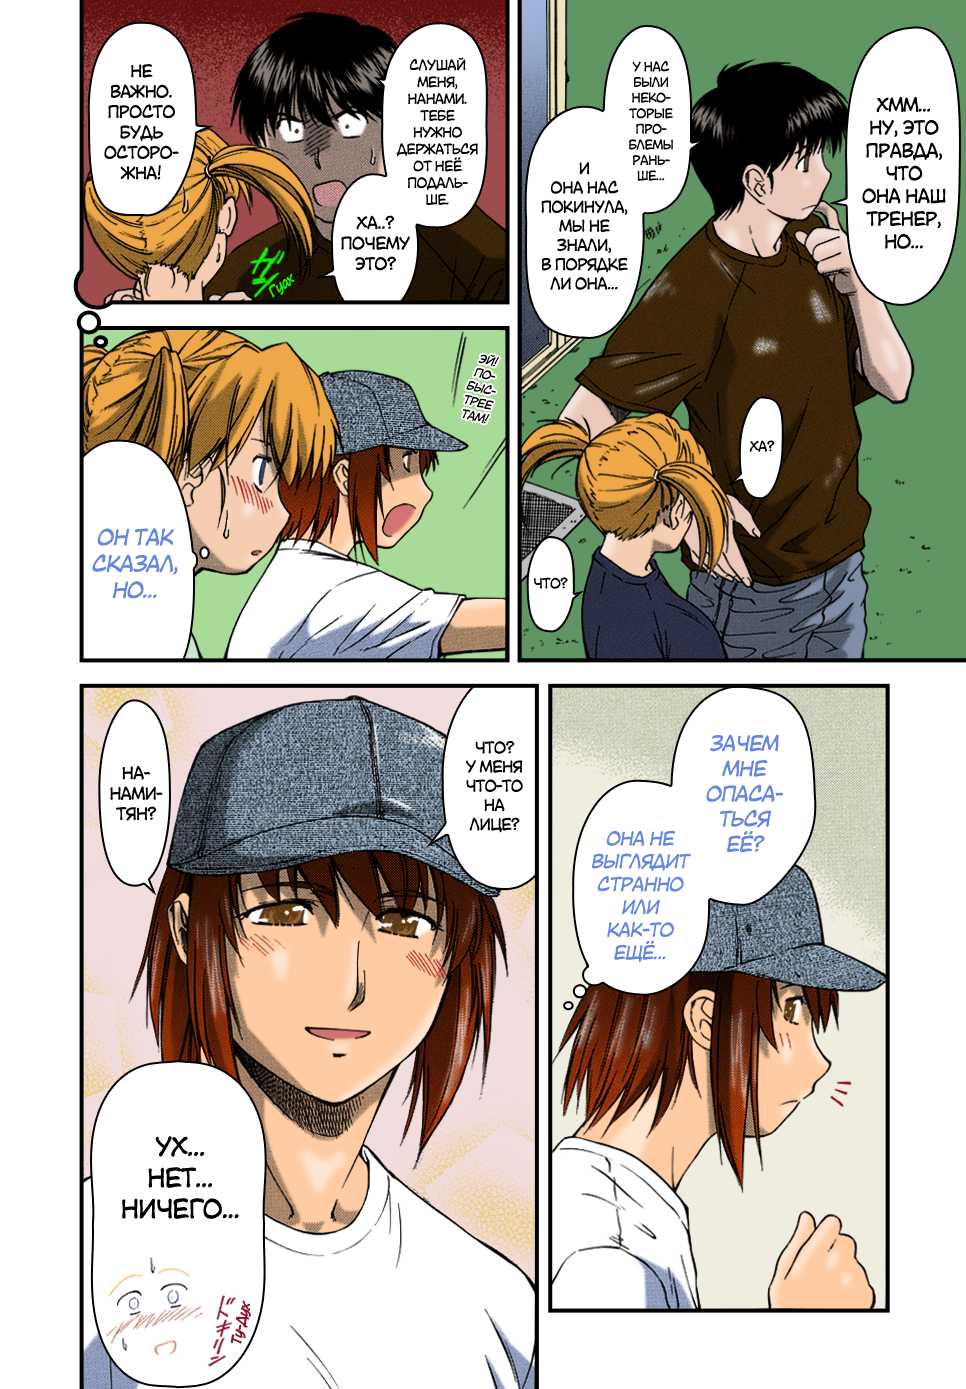 [Nagare Ippon] Offside Girl Ch. 1-5 [Russian] [Colorized] [Decensored] [WIP] - Page 37